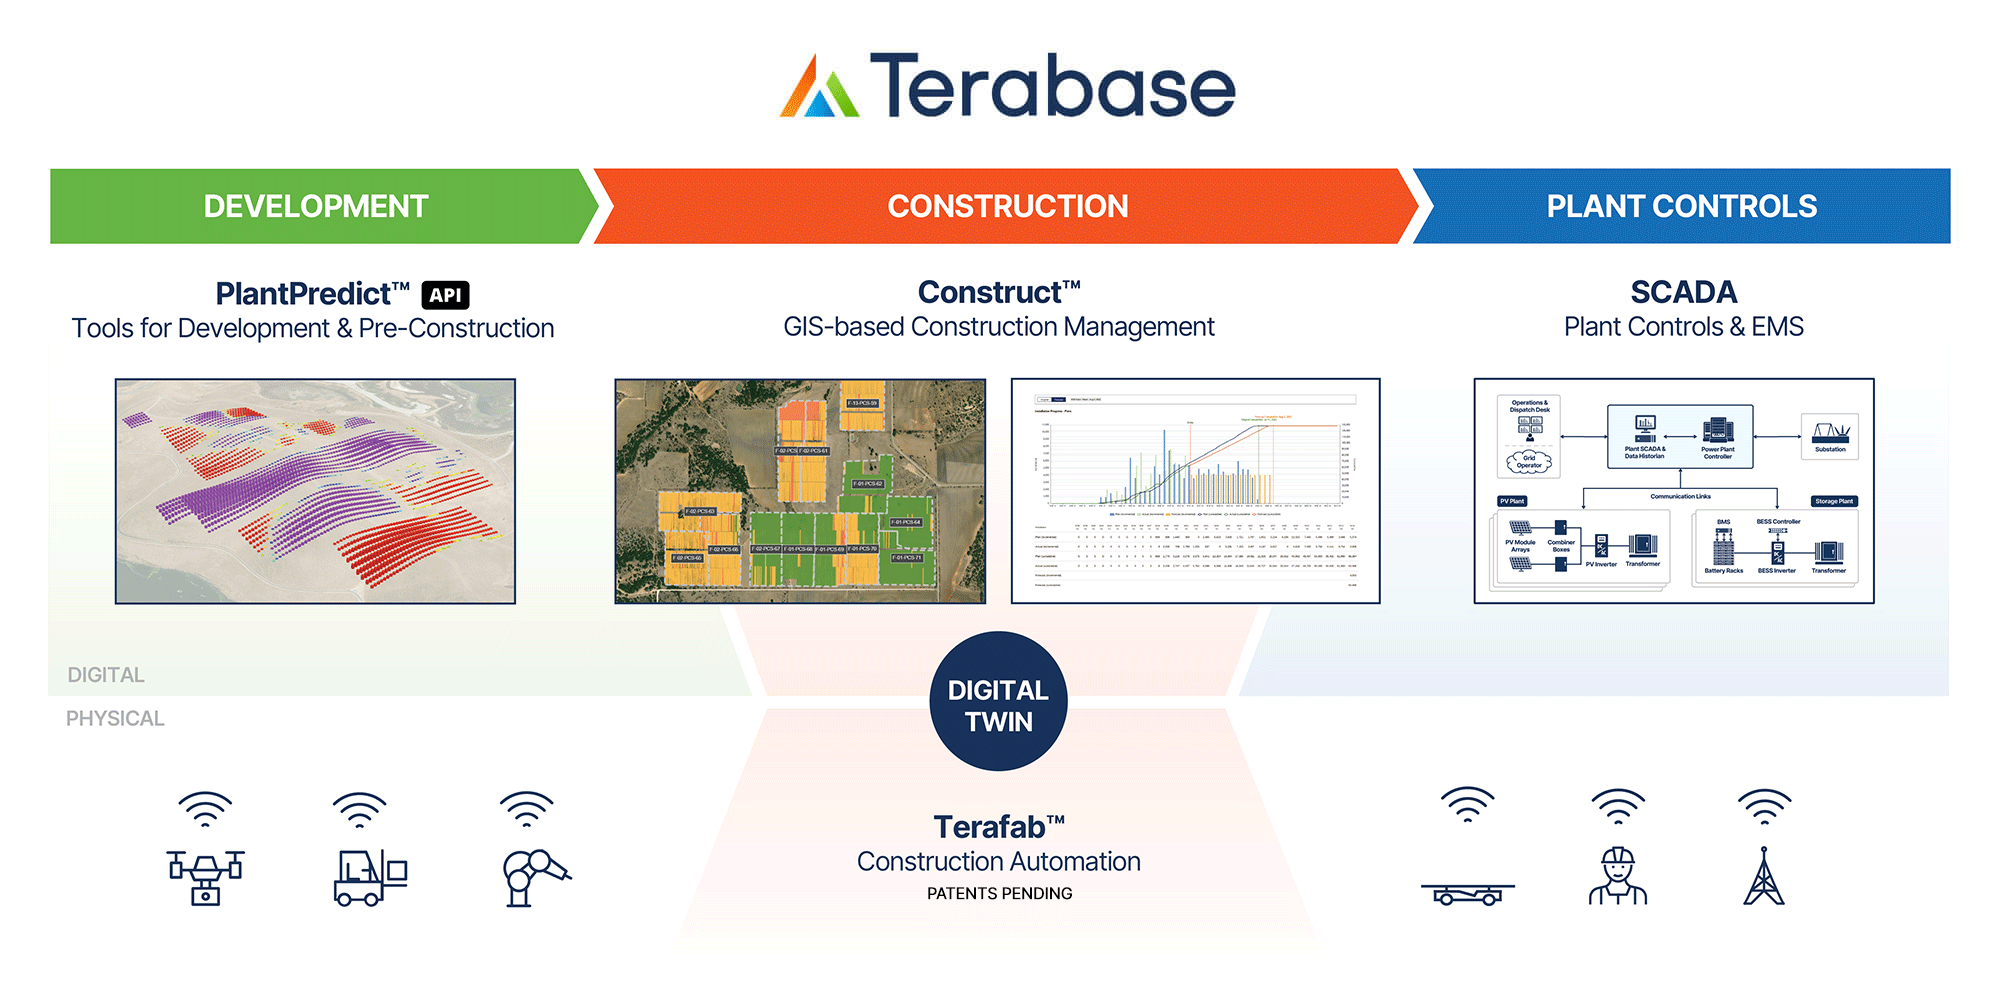 Terabase Product and Services Ecosystem Diagram